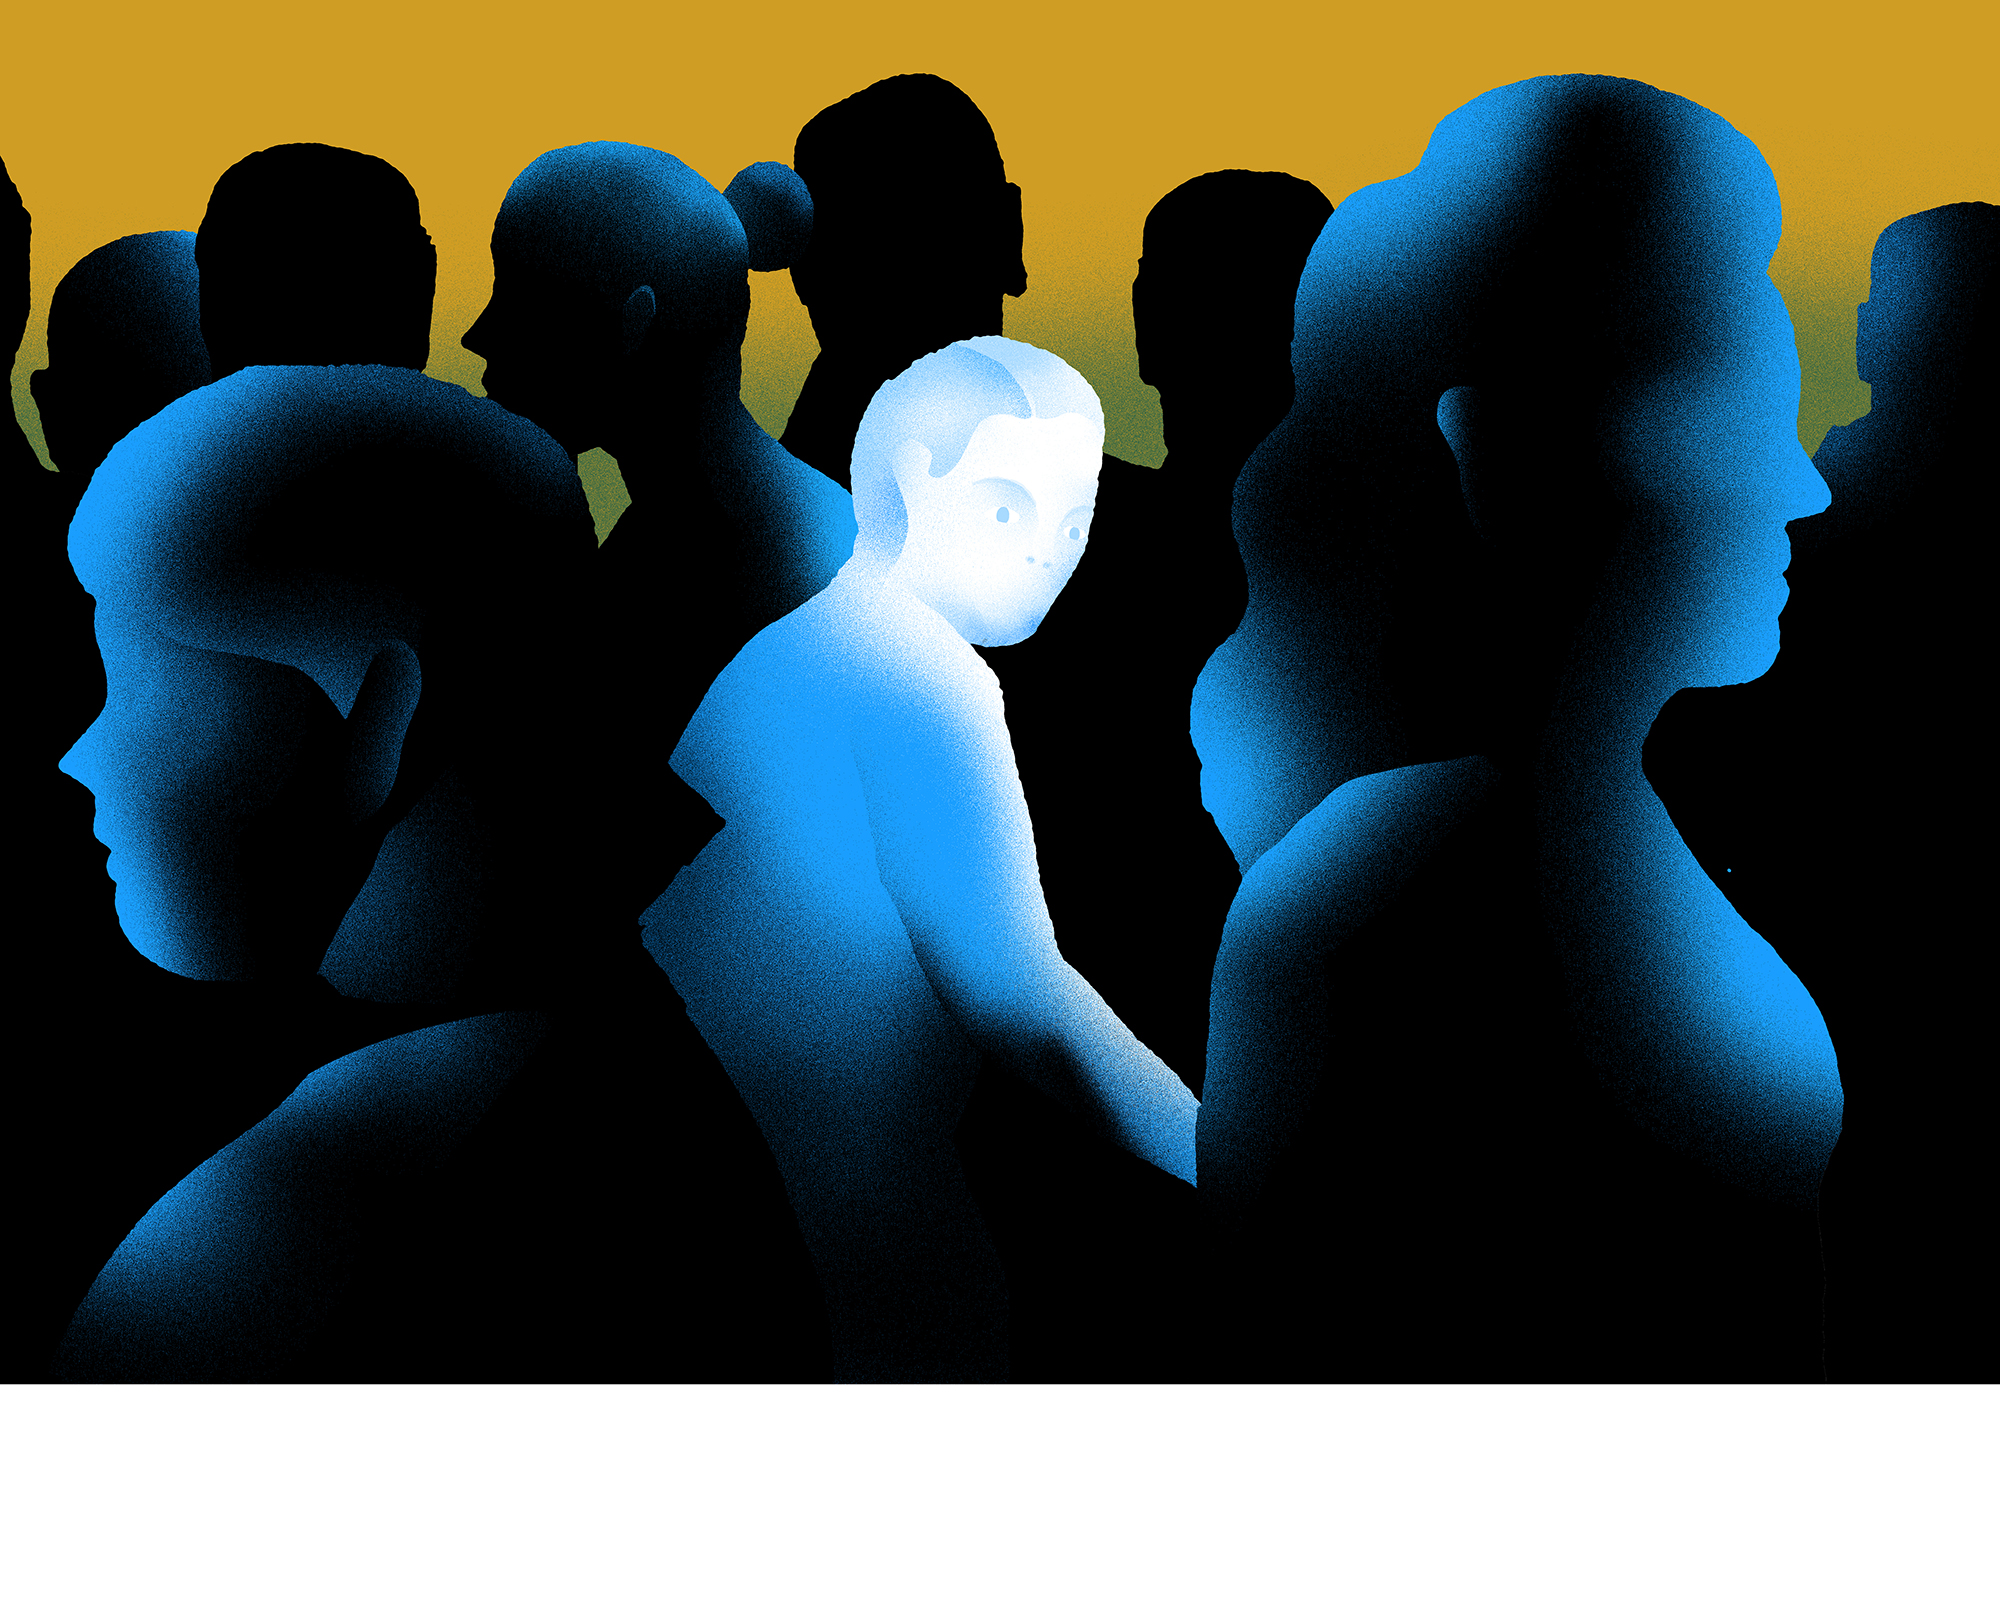 Illustration: a white-highlighted person looks suspiciously at the crowd around him, who are in shadow.